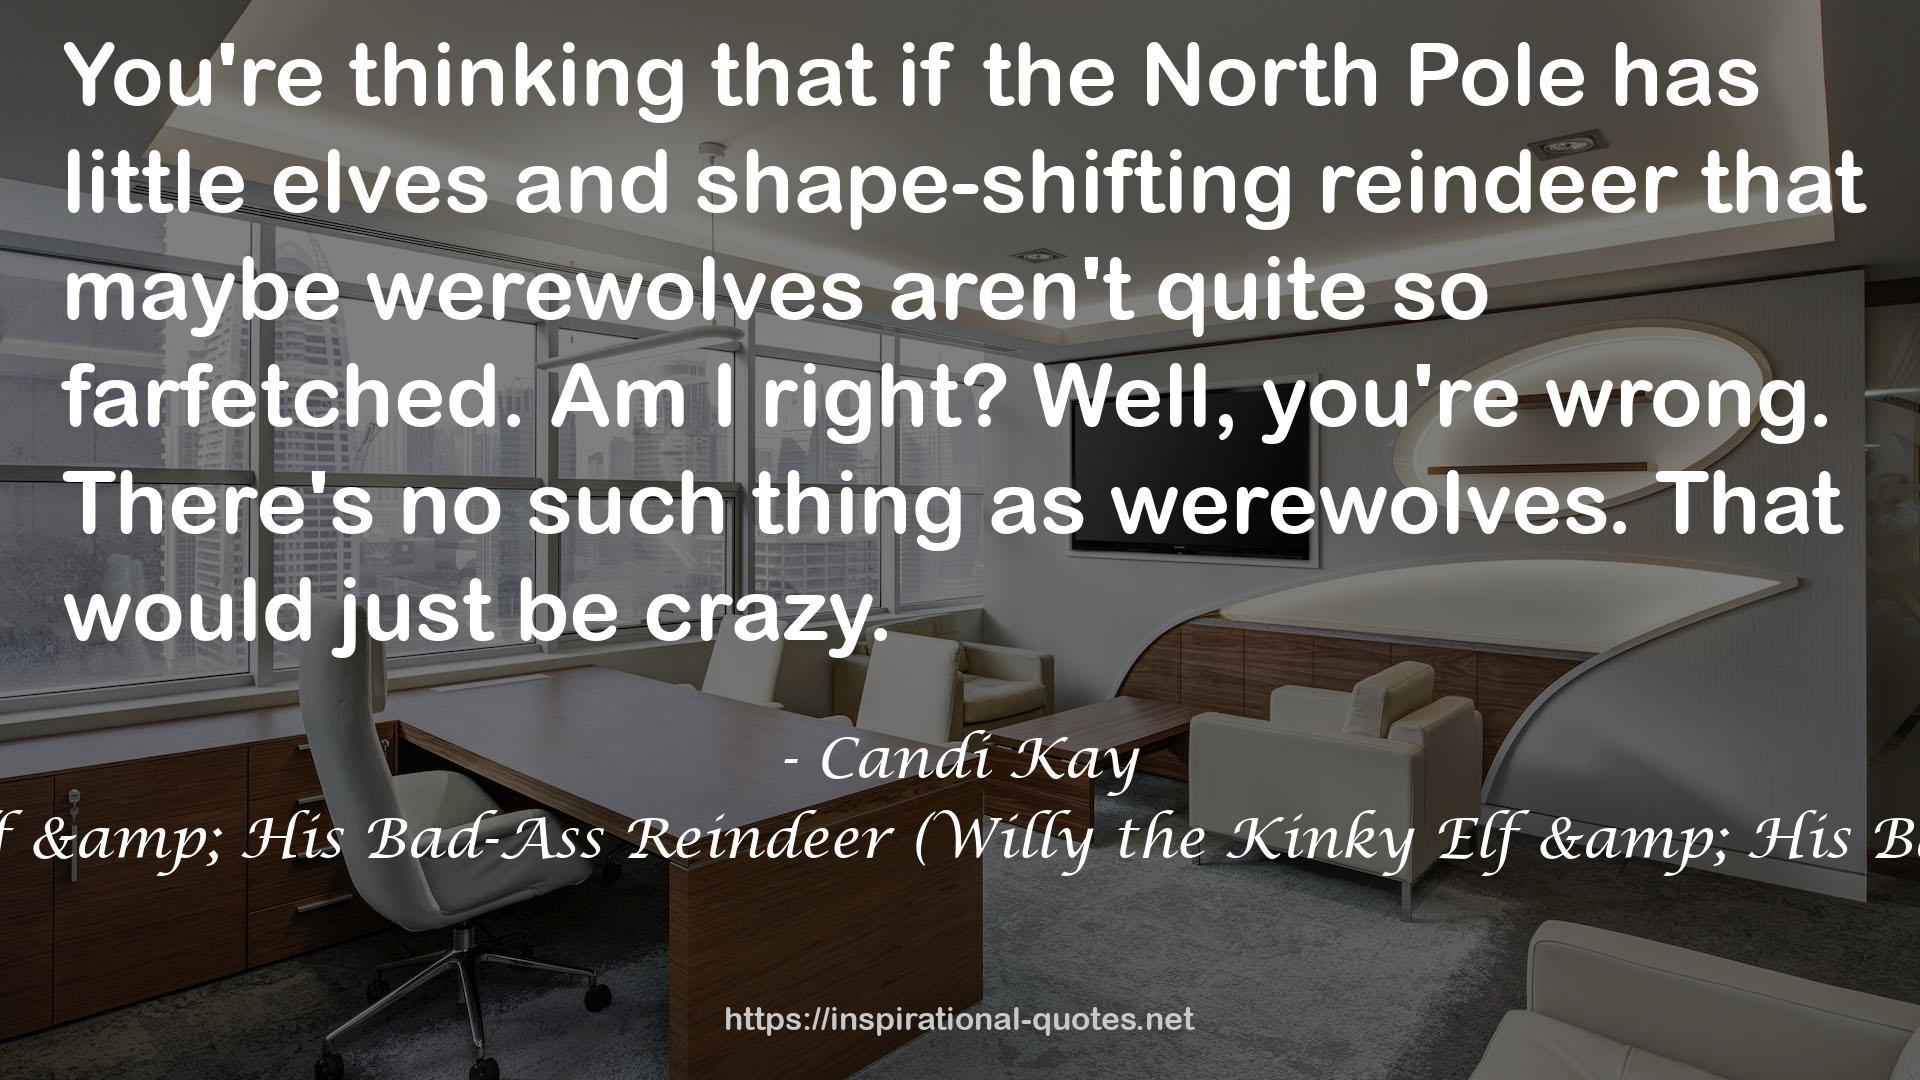 Willy the Kinky Elf & His Bad-Ass Reindeer (Willy the Kinky Elf & His Bad-Ass Reindeer #1) QUOTES